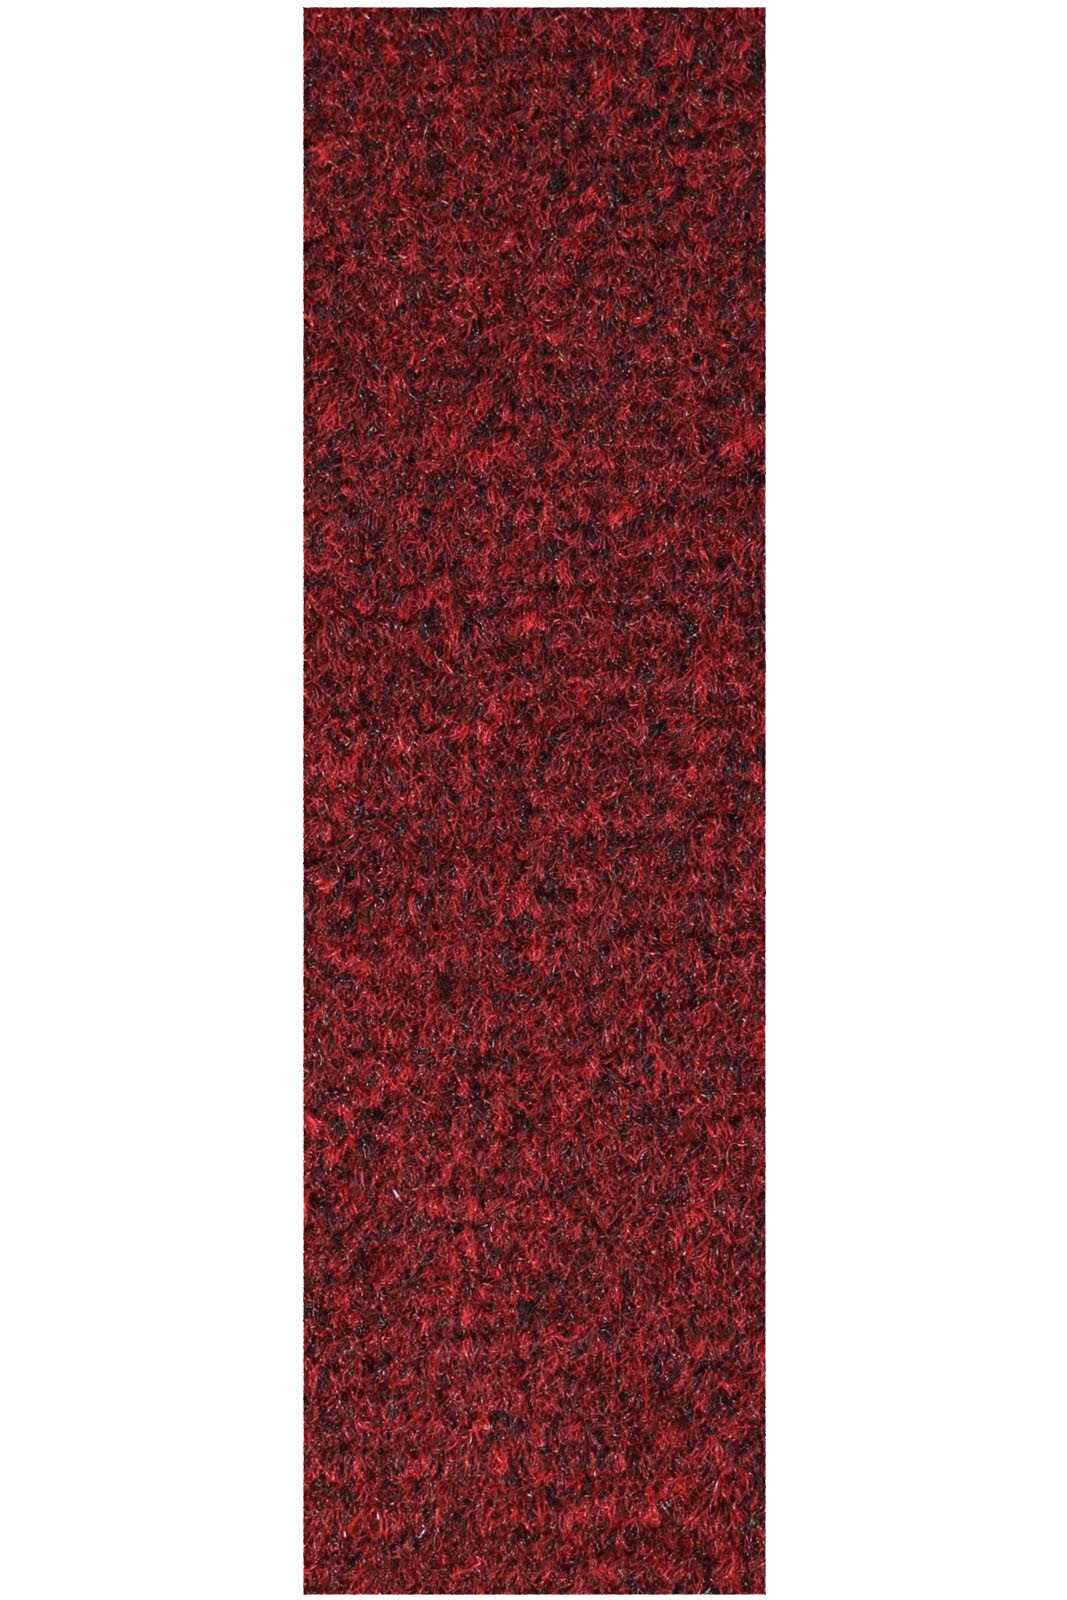 Commercial Indoor/Outdoor Red Custom Size Runner 2' x 4' - Area Rug with Rubber Marine Backing for Patio, Porch, Deck, Boat, Basement or Garage with Premium Bound Polyester Edges - image 1 of 1